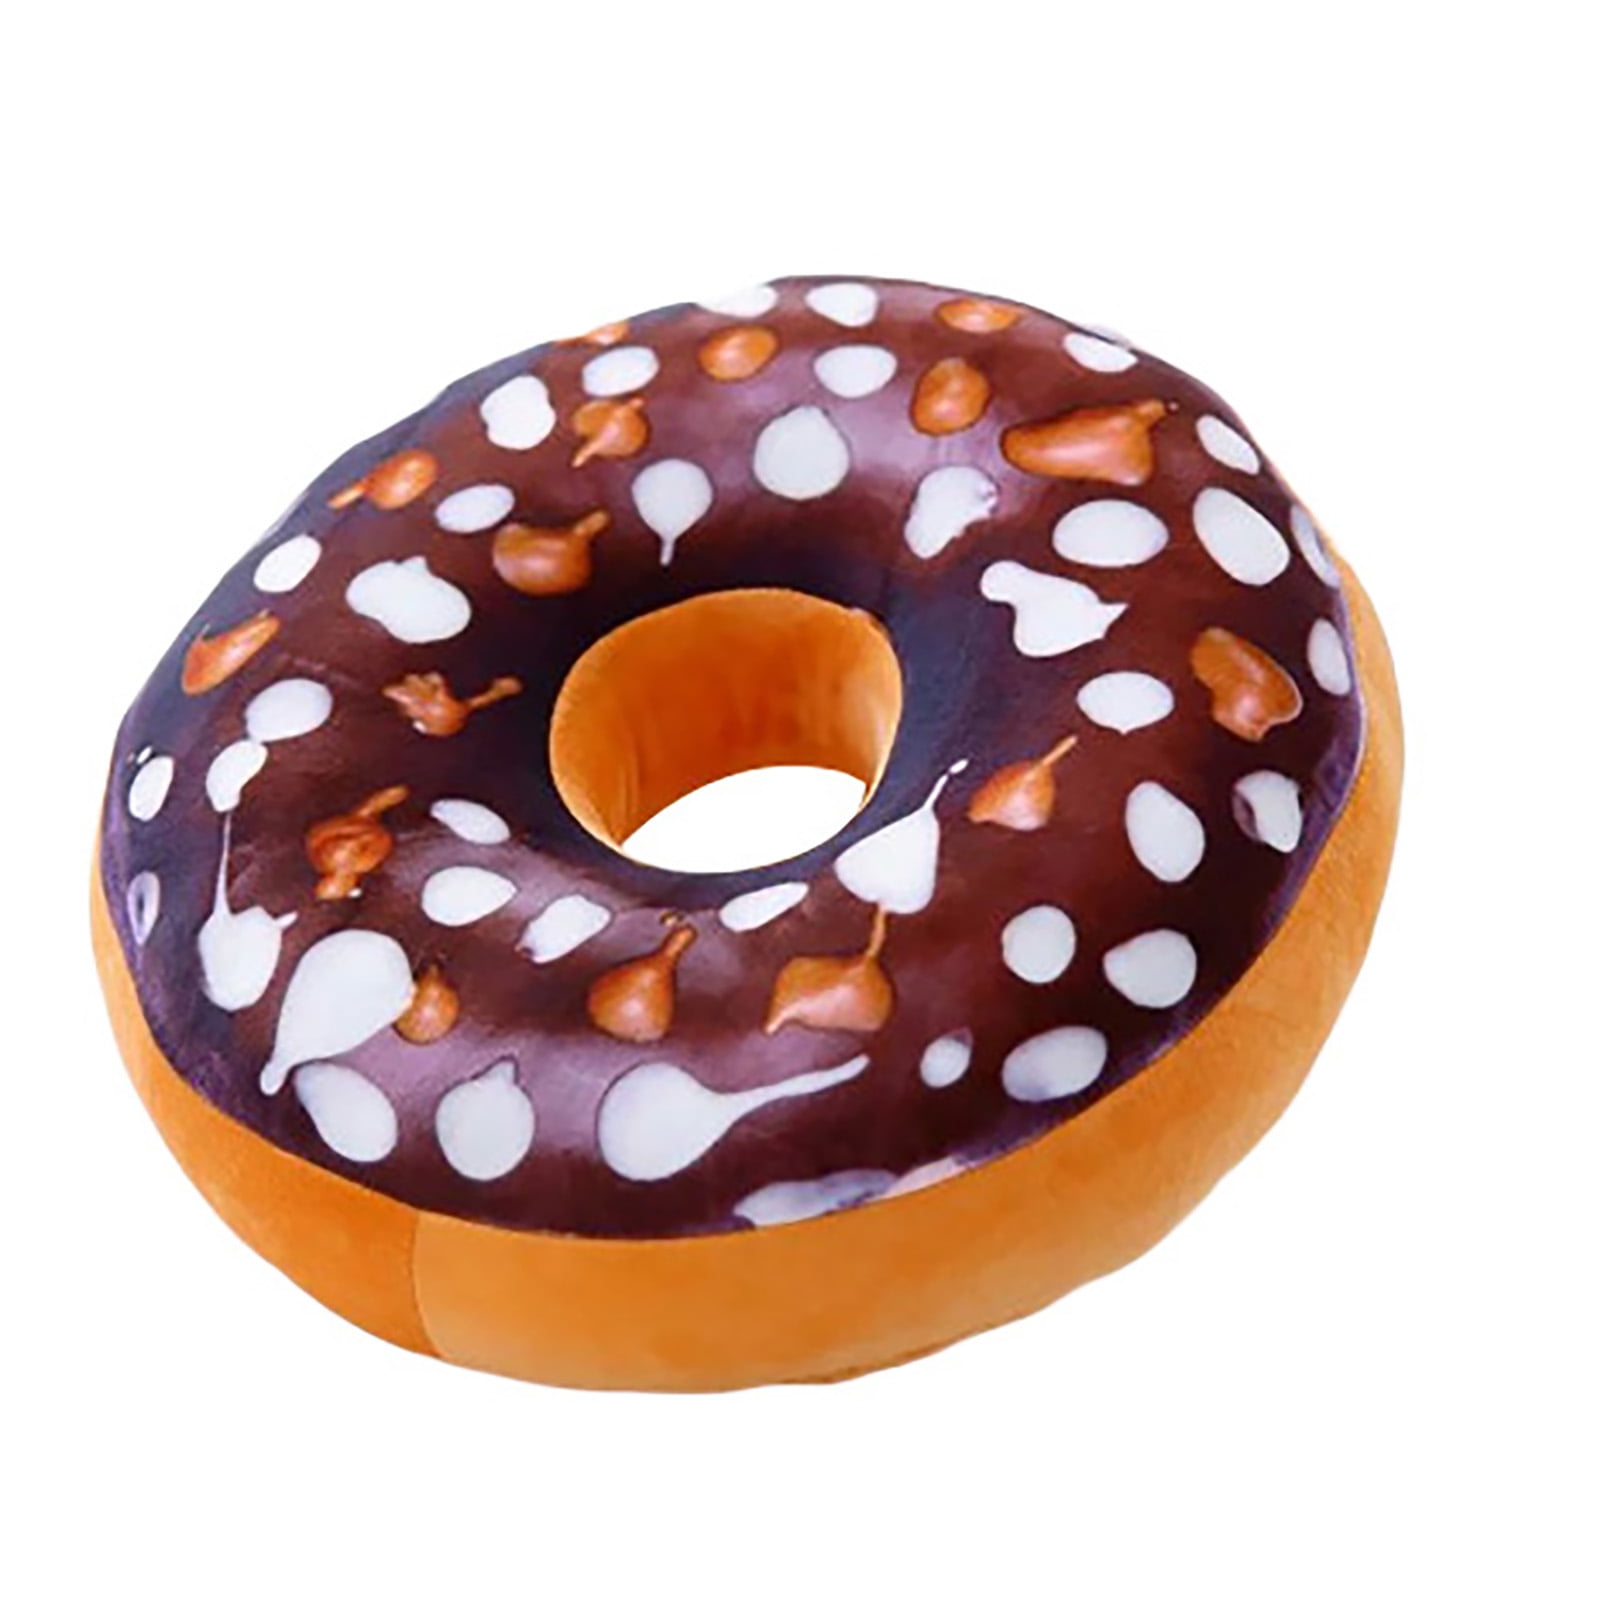 Cuteam Pillow,Sofa Cushion Easy-cleaning Donut Design Practical Multicolor Pillow for Home